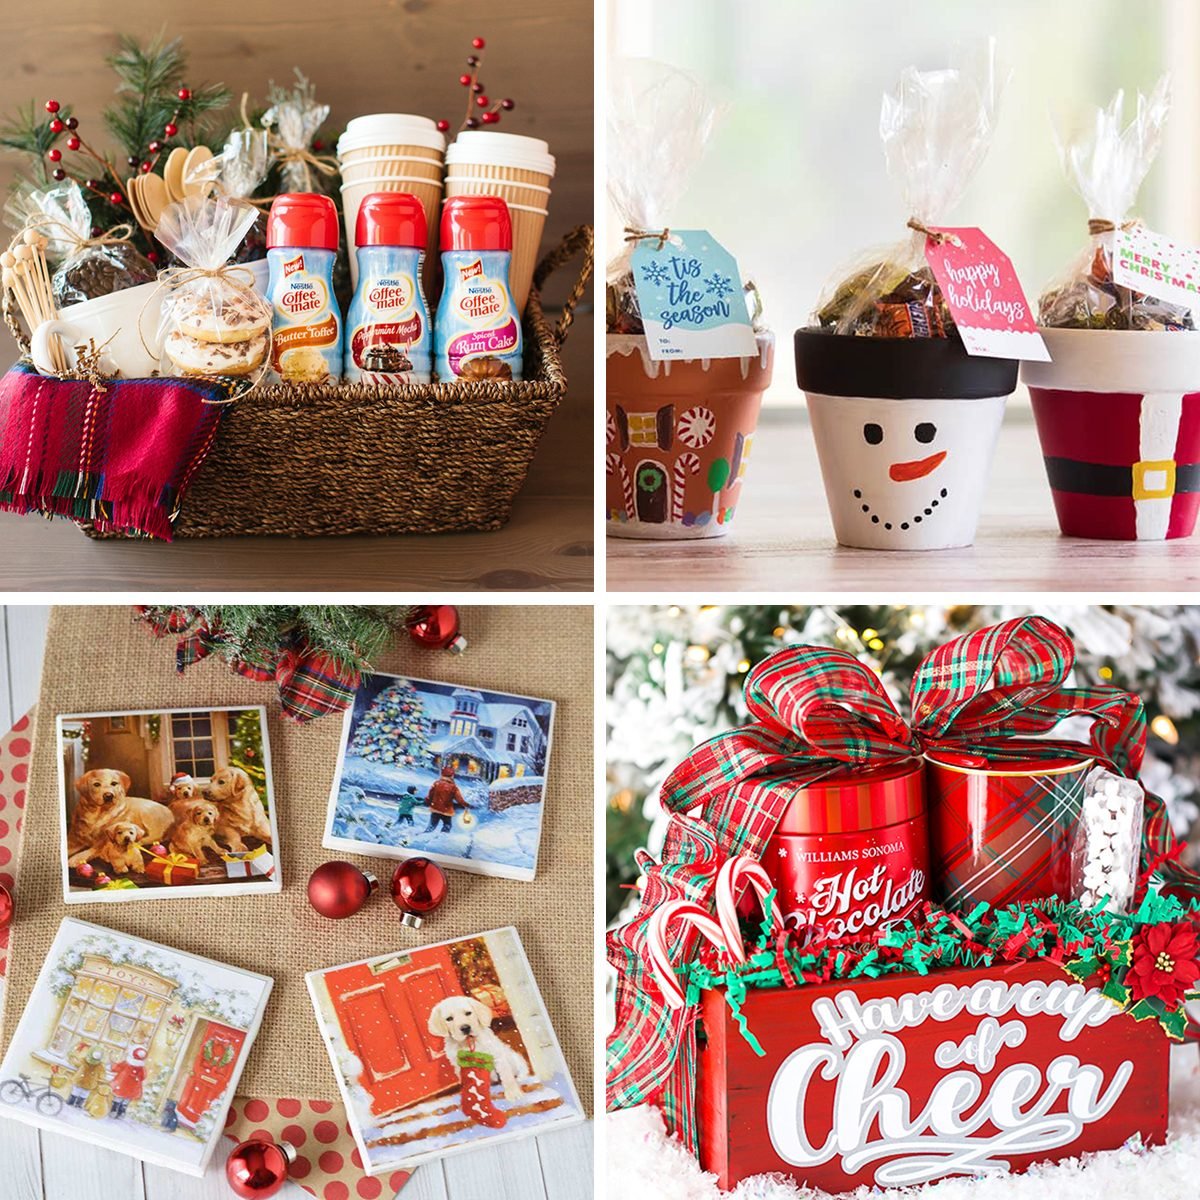 https://www.rd.com/wp-content/uploads/2017/12/diy-christmas-gifts-collage_FT.jpg?fit=700%2C700